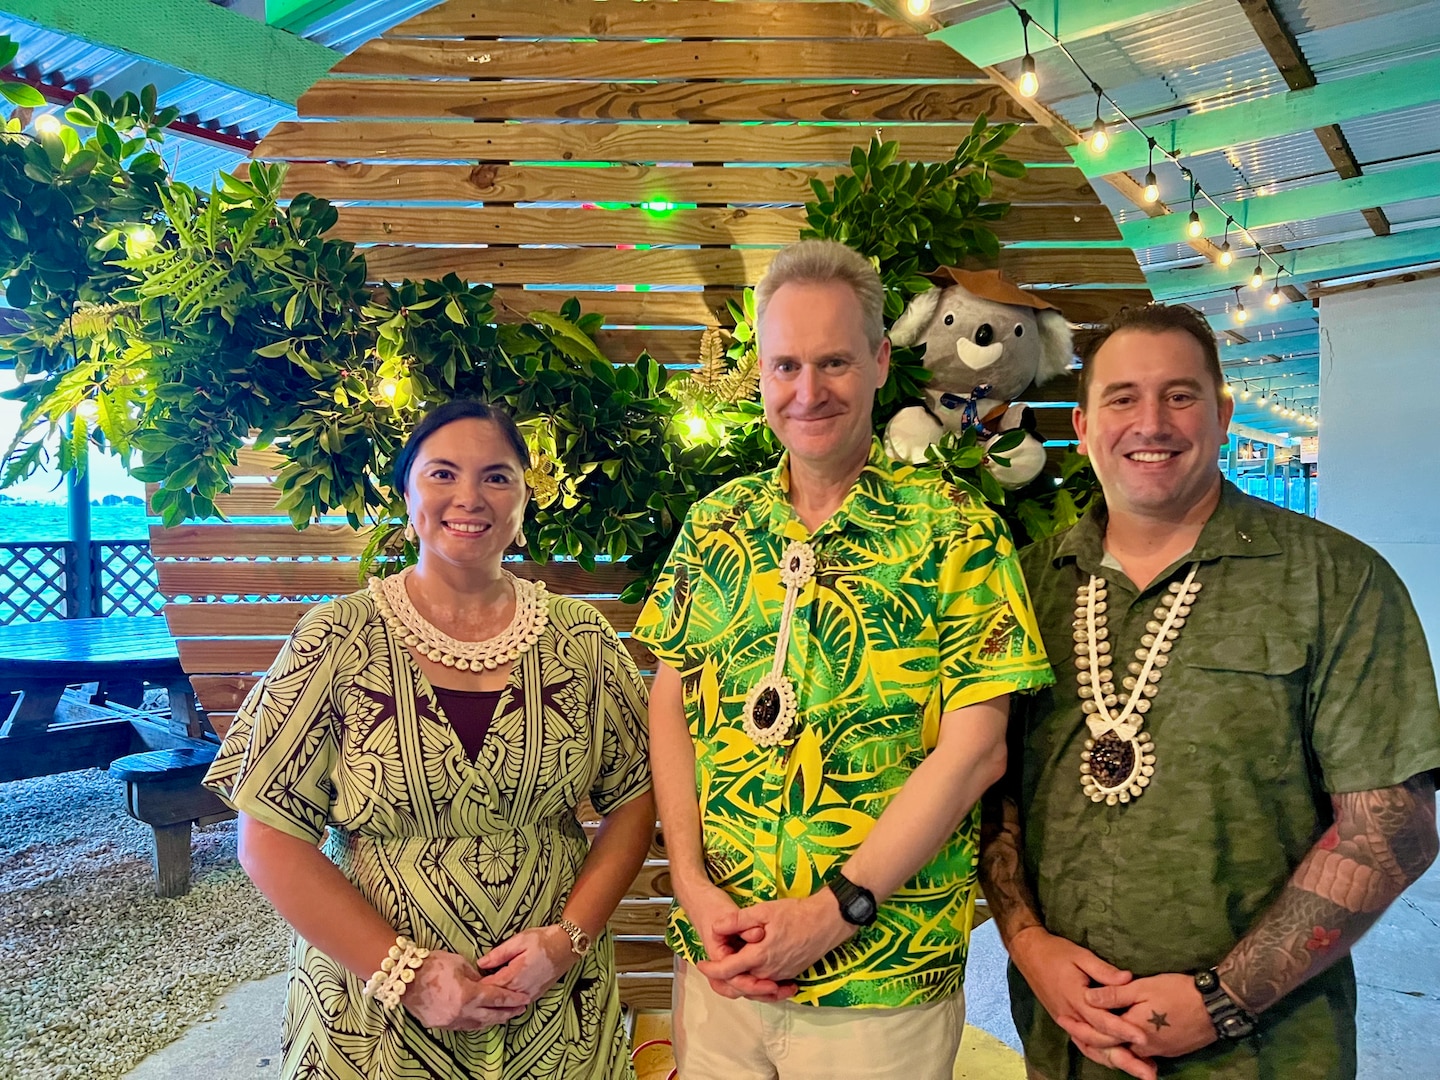 In Majuro, Republic of the Marshall Islands, on Jan. 26, 2024, U.S. Coast Guard Forces Micronesia/Sector Guam’s Cmdr. Ryan Crose, response department head, and Lt. Cmdr. Christine Igisomar, COFA maritime advisor, represented the U.S. Coast Guard at the Australia Day celebration in Majuro and spent time with the Australian Ambassador to the RMI, his Excellency Paul Wilson, and members of the U.S. Embassy team. The Australia National Day is observed annually on January 26 and is an opportunity for Australians to celebrate all the things they love about their country: land, sense of fair go, lifestyle, democracy, freedom, people, and their various cultures, traditions, and belief systems. (U.S. Coast Guard photo)